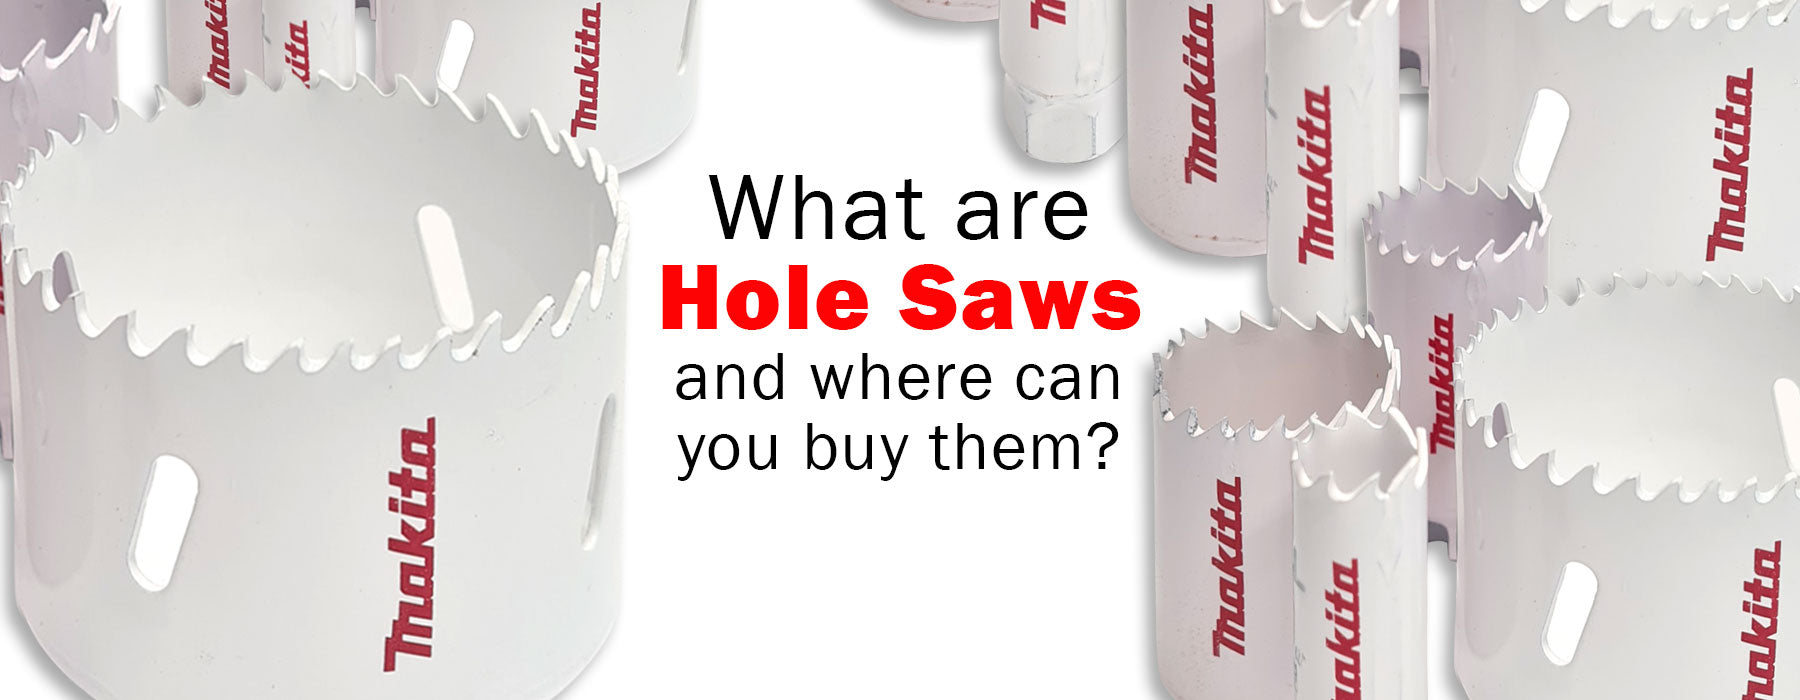 What are Hole Saws and how to use them blog banner image